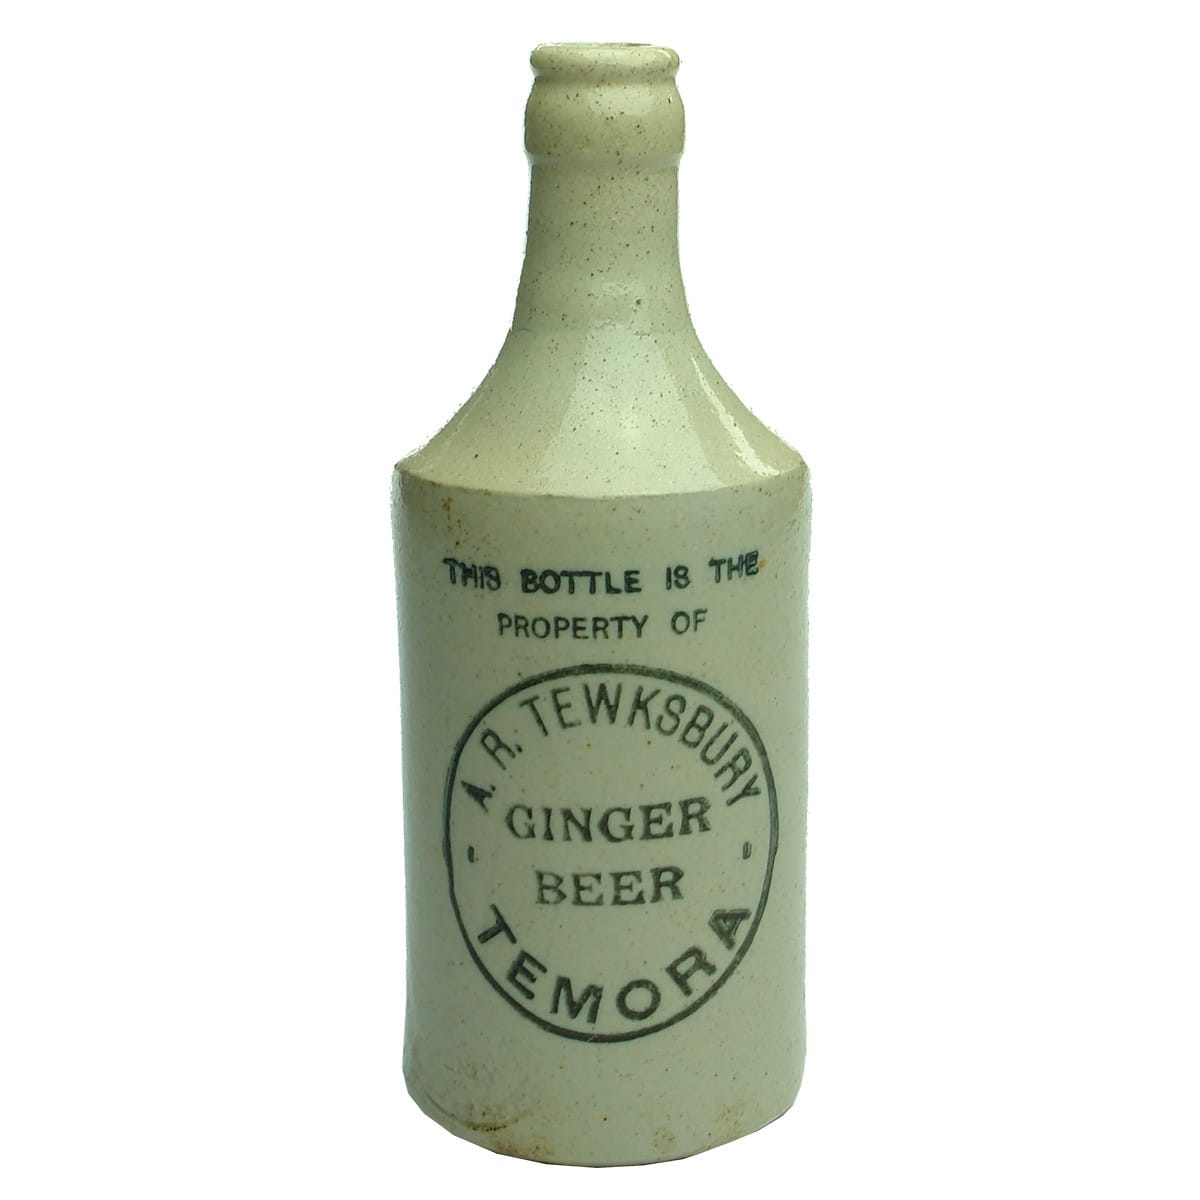 Ginger Beer. A. R. Tewksbury, Temora. Crown Seal. Dump. All White. (New South Wales)